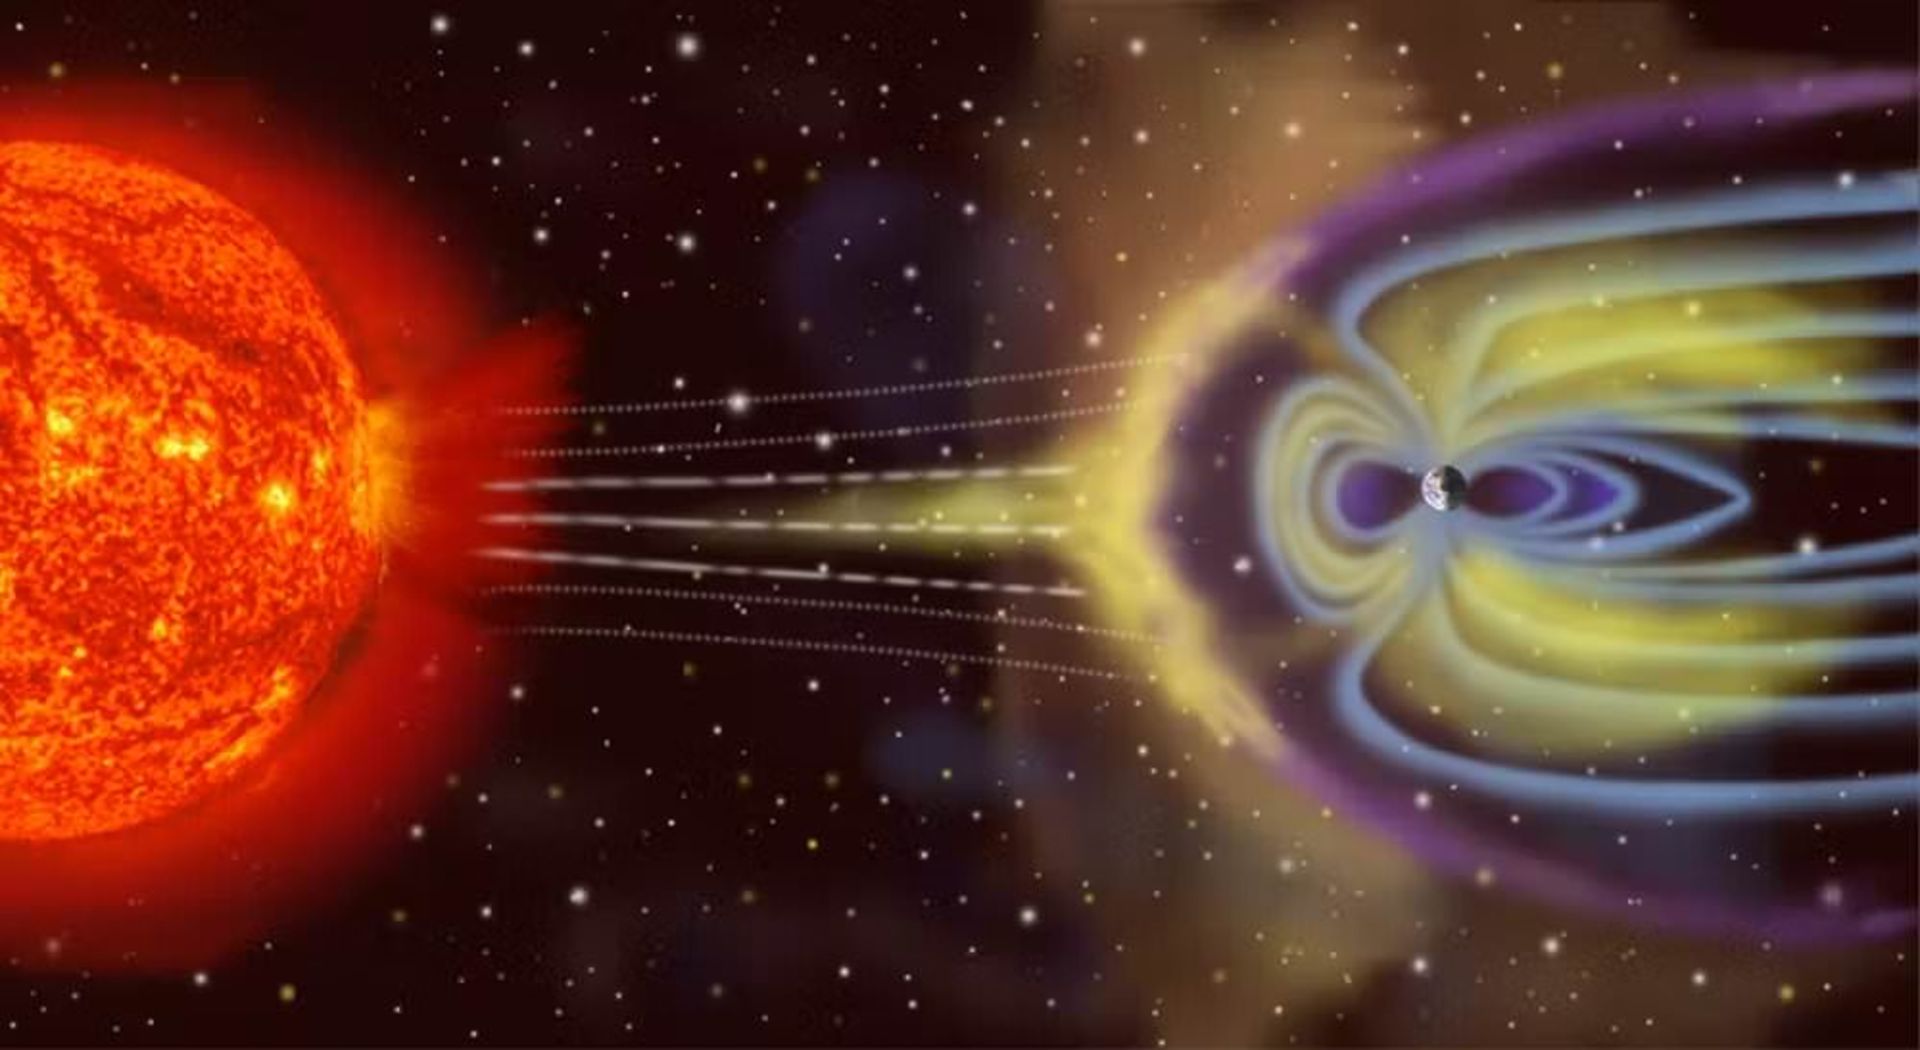 Earth's magnetic field against the sun